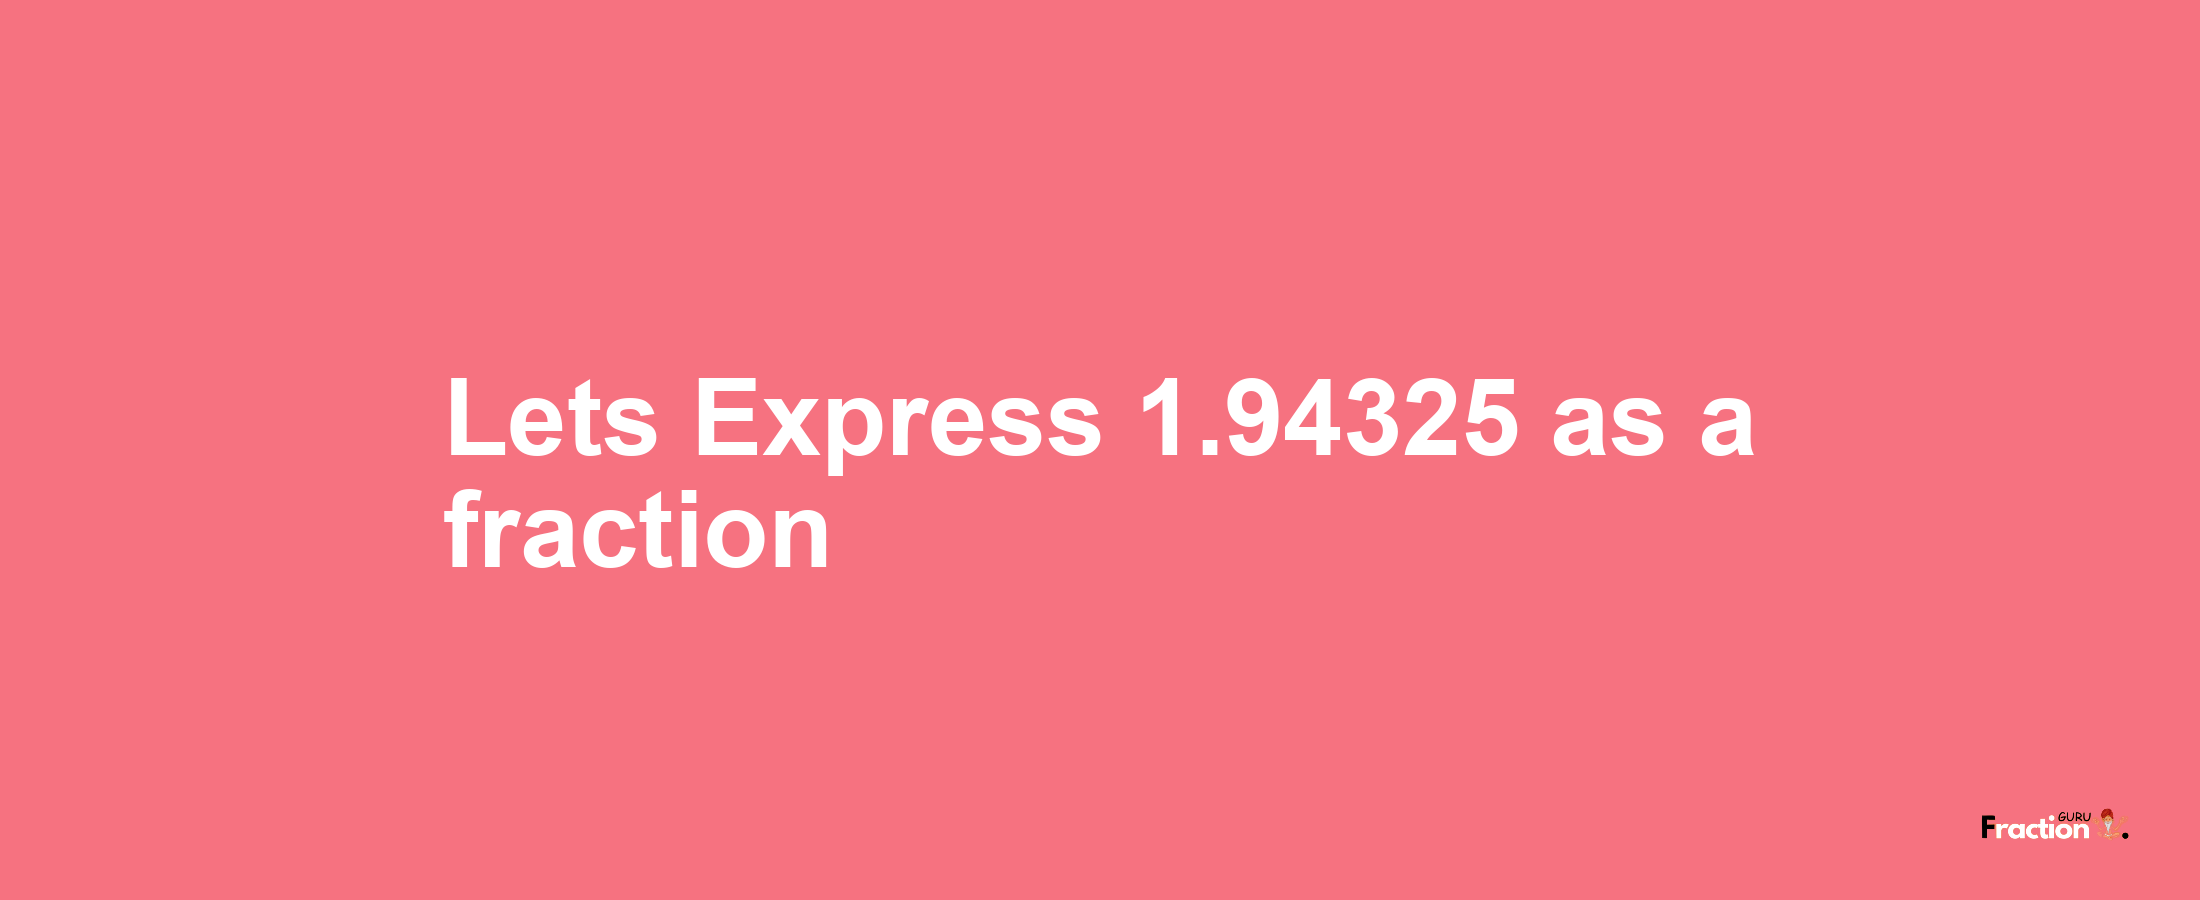 Lets Express 1.94325 as afraction